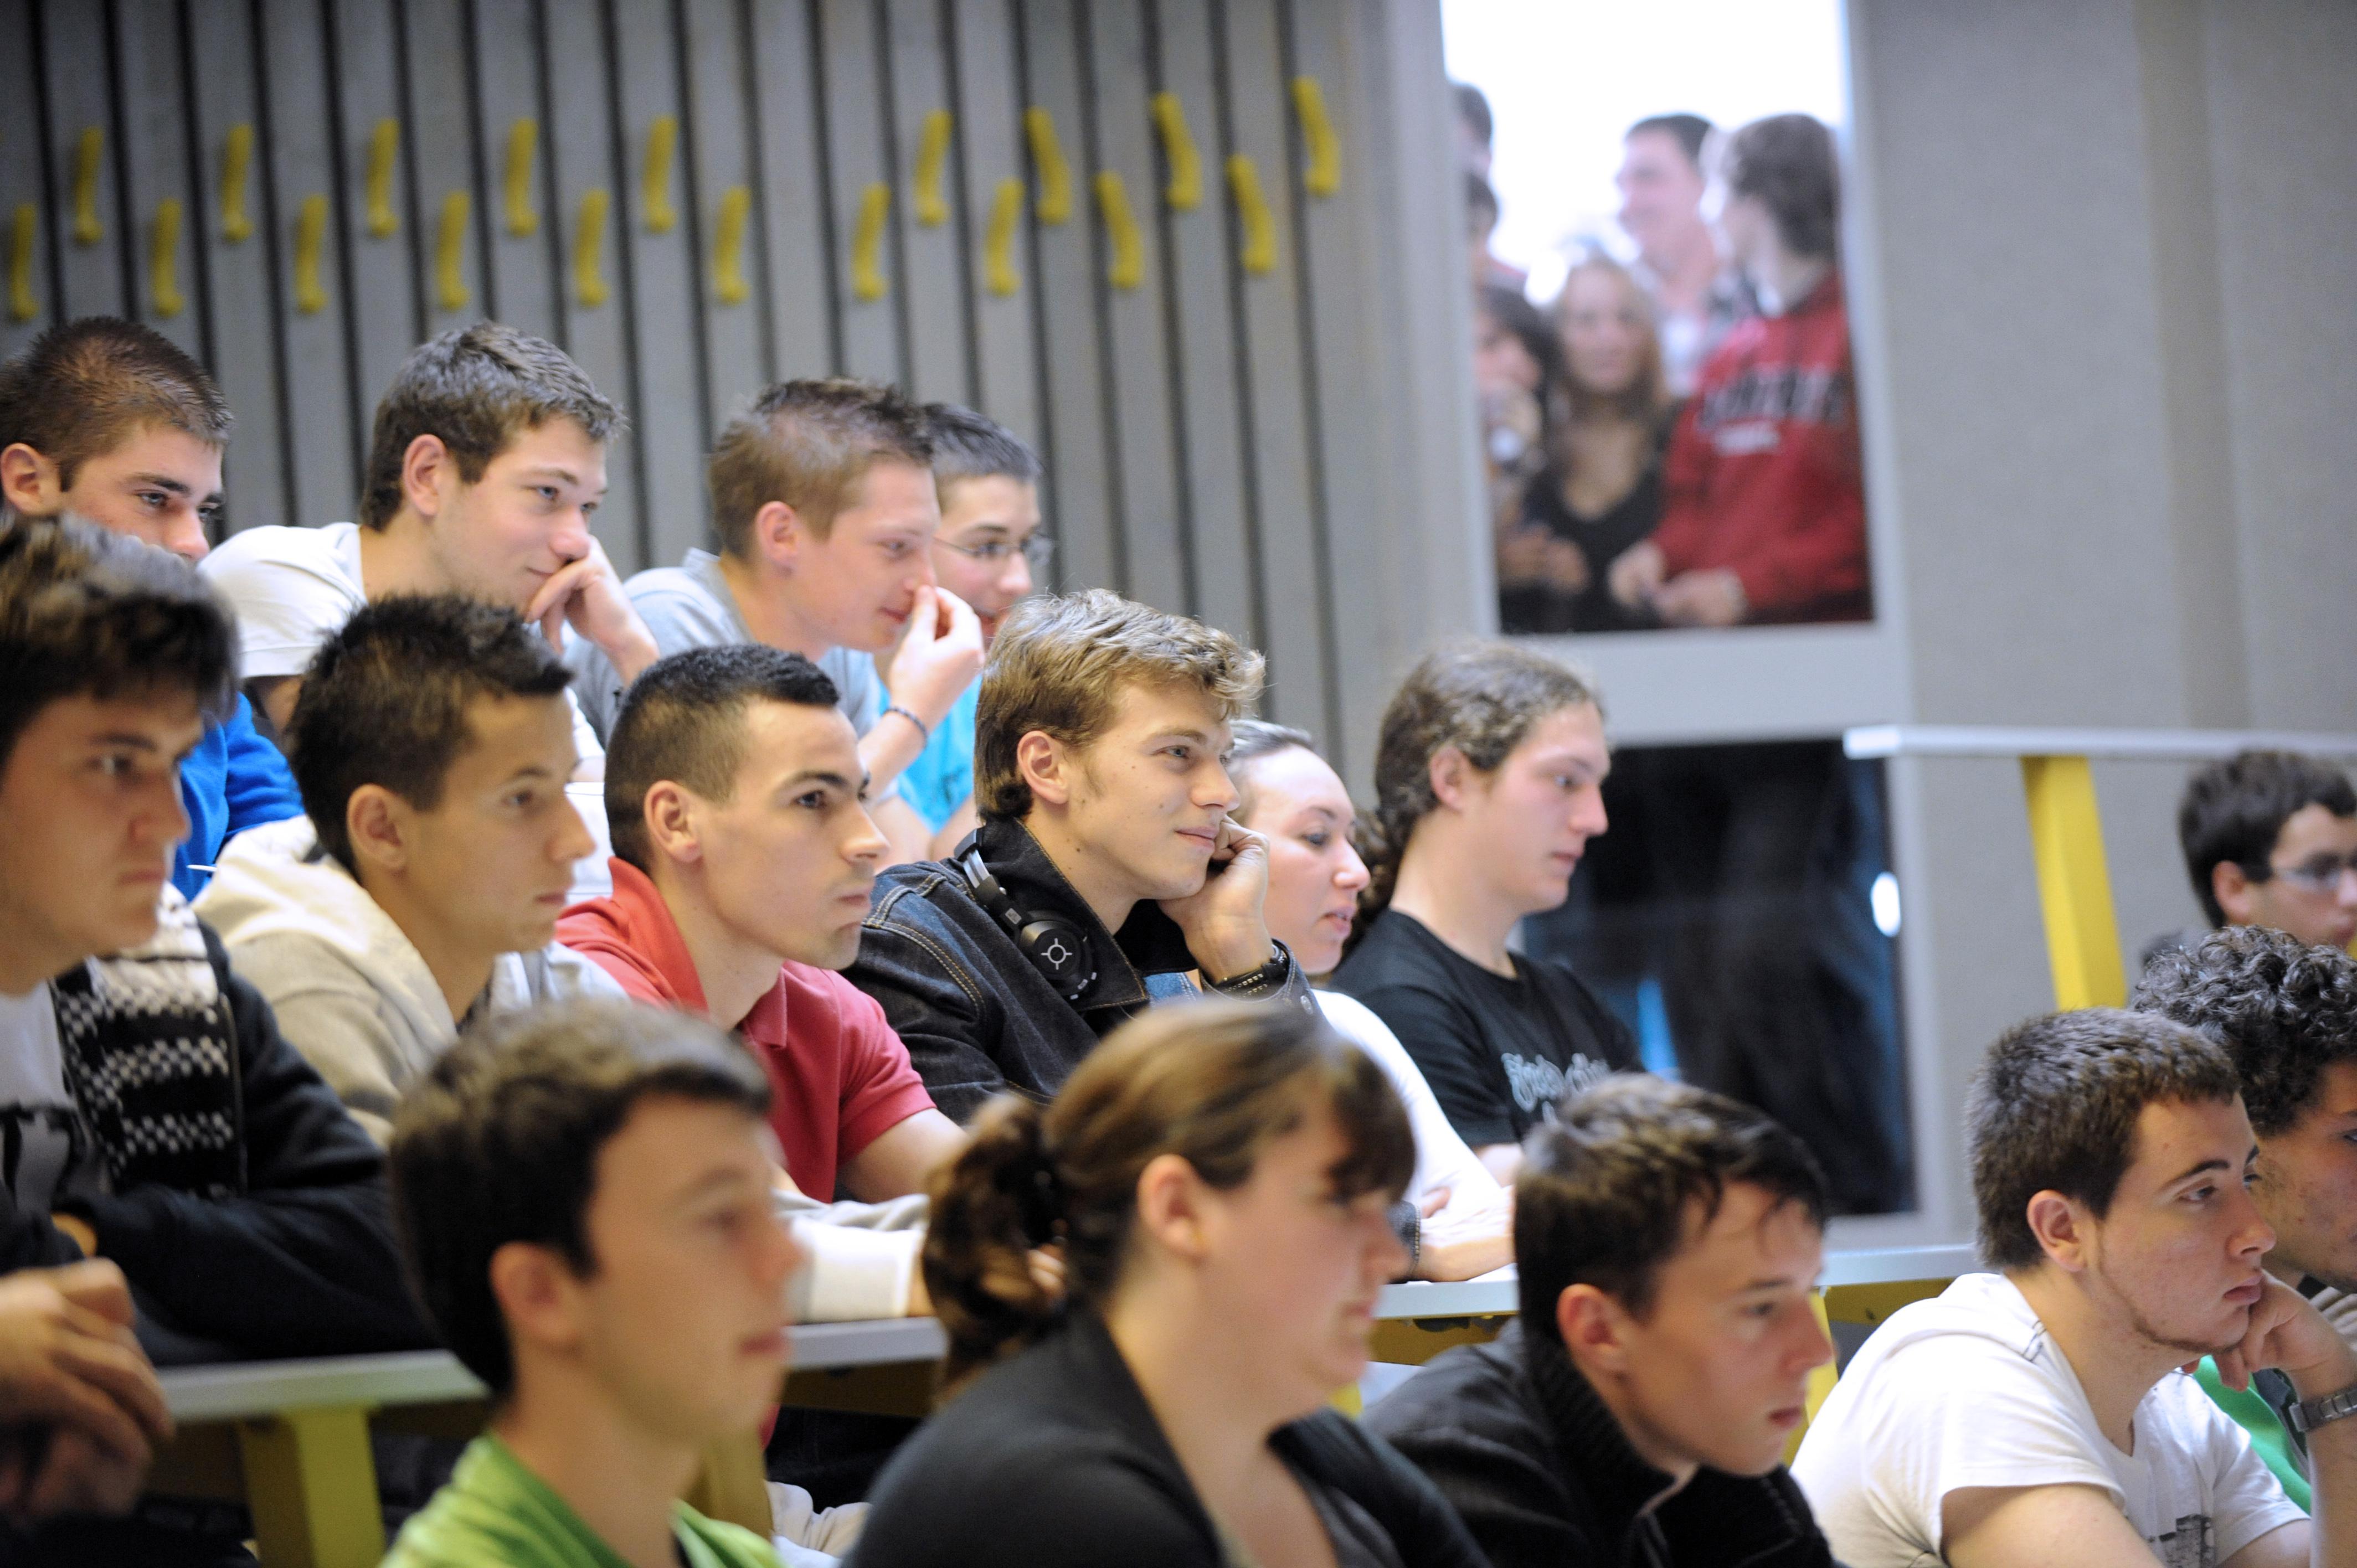 A group of freshmen economy students stand together chatting after they attended an information lecture 16 October 2003 in an auditorium of the technical university of Berlin at the beginning of the winter semester. 